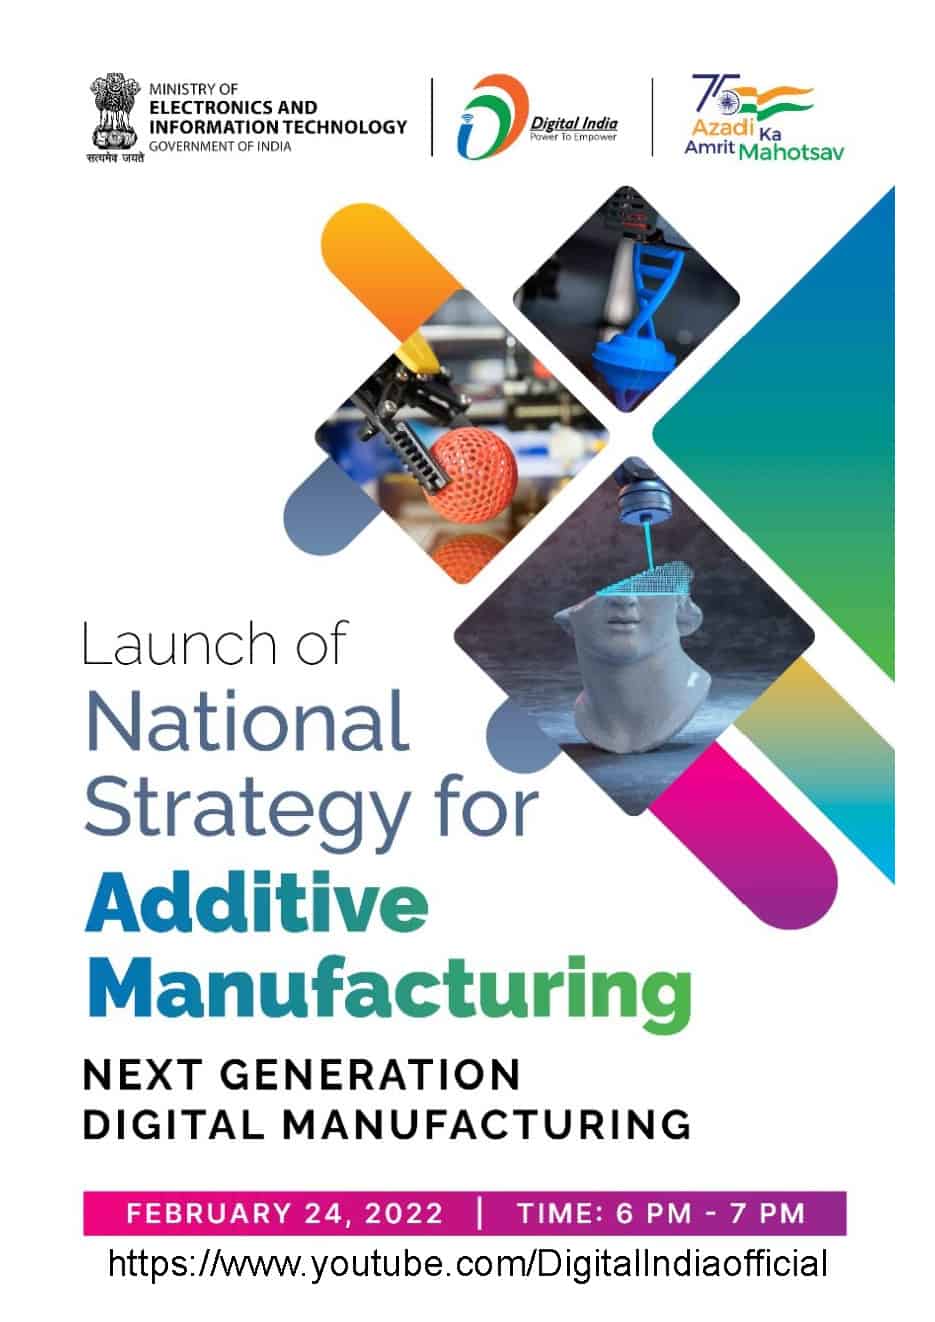 India to launch National Strategy on Additive Manufacturing